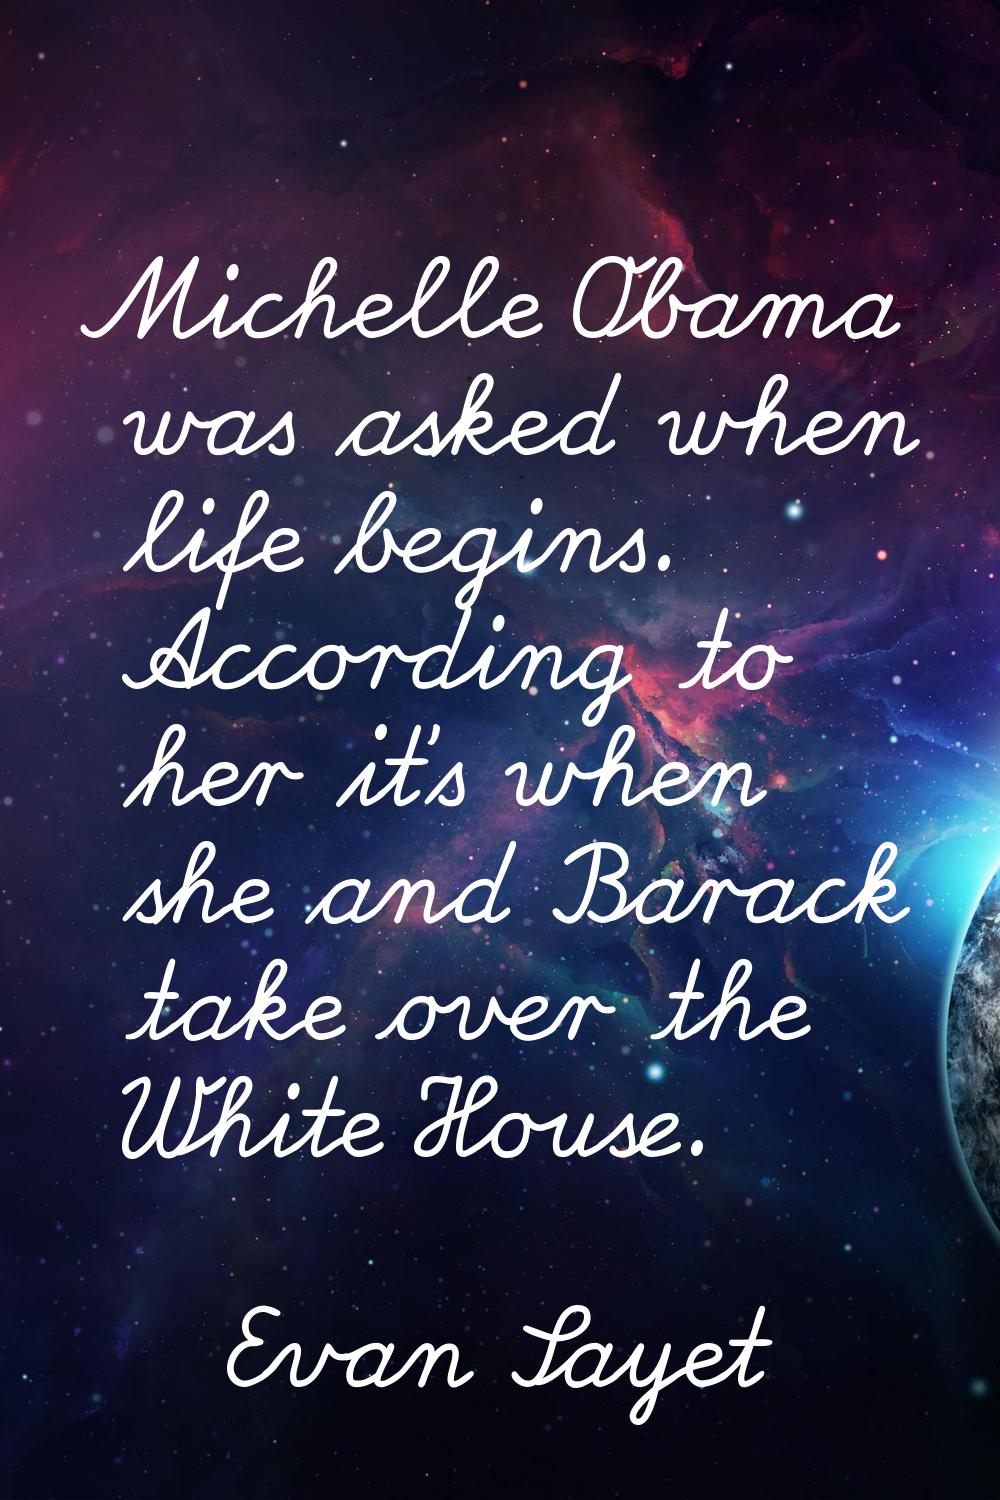 Michelle Obama was asked when life begins. According to her it's when she and Barack take over the 